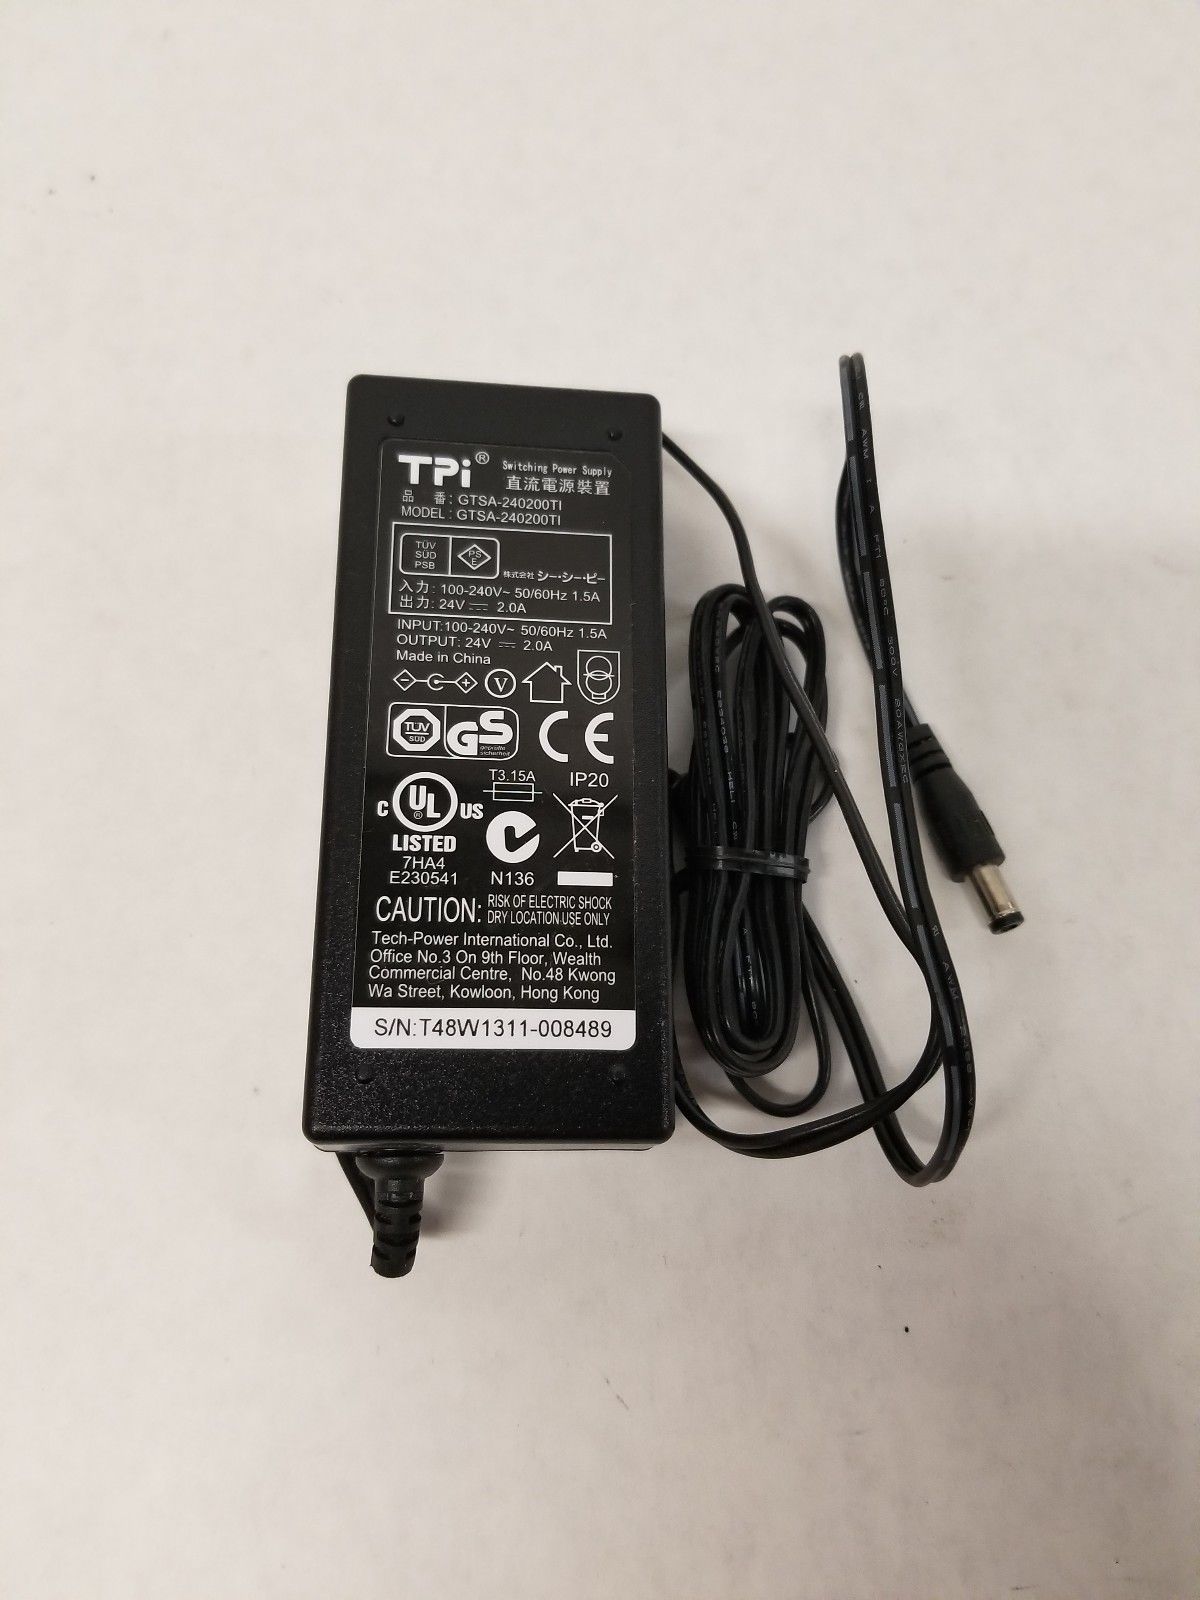 *100% Brand NEW* 24V 2A 48W TPi Charger GTSA-240200TI AC Adapter Switching Power Supply Free shipping!